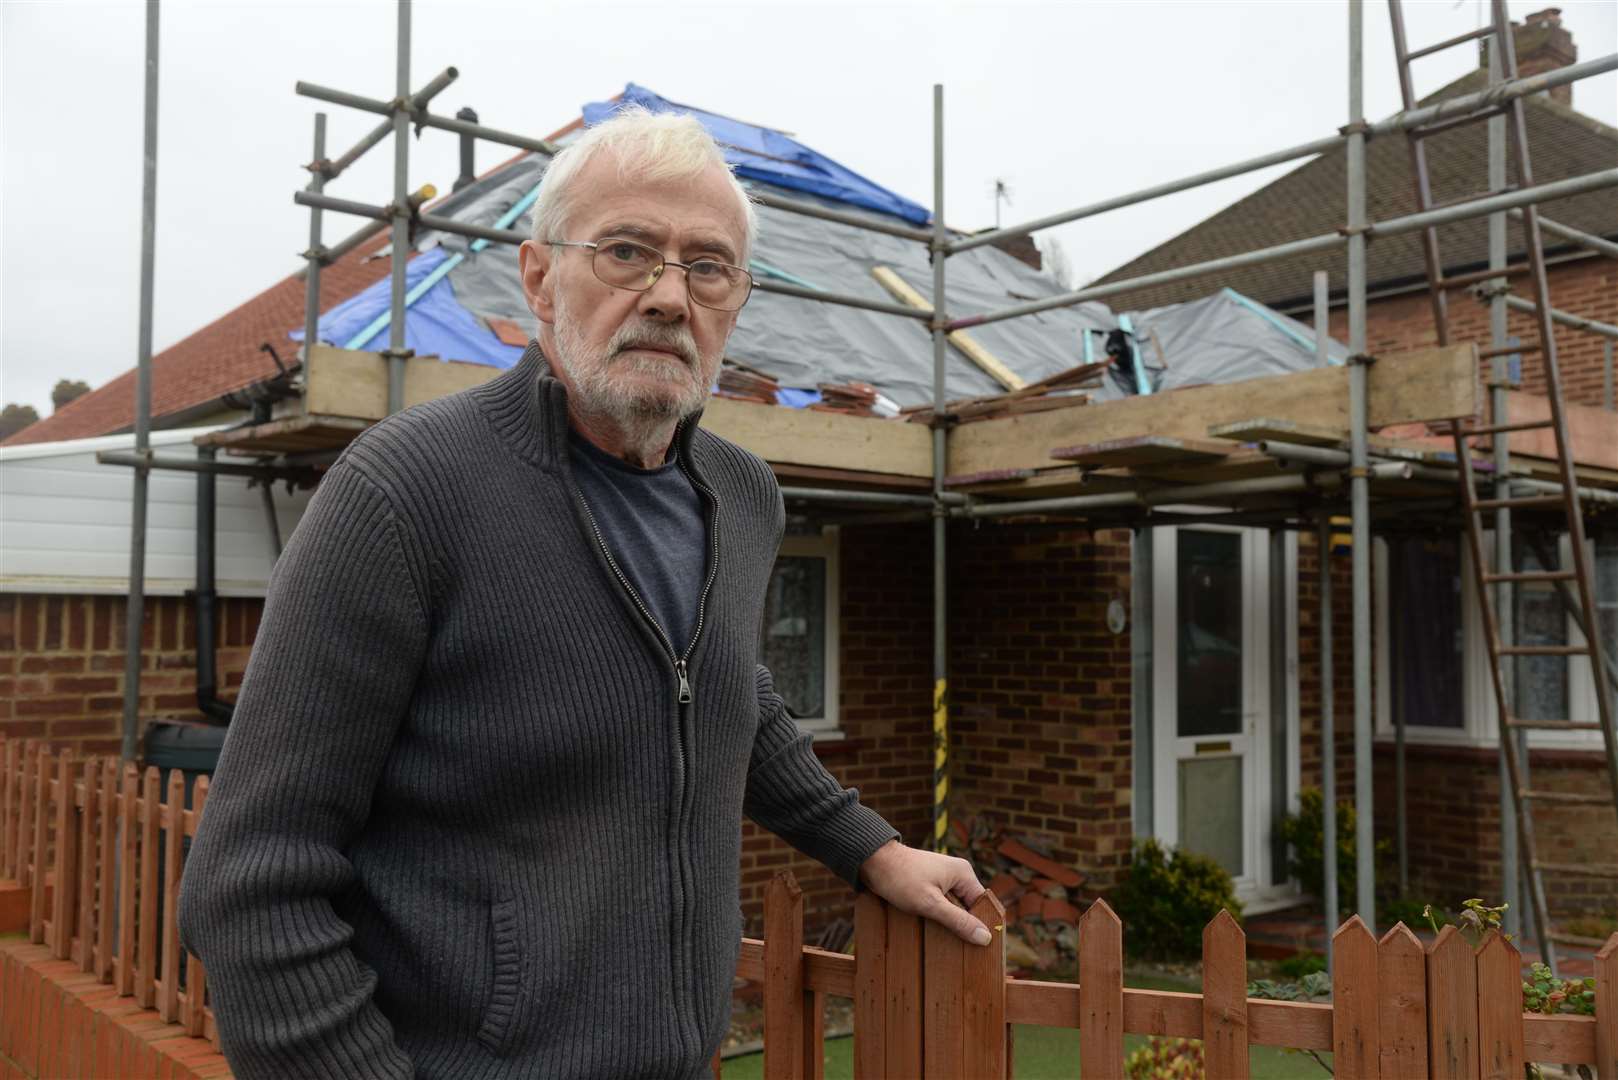 Kind tradesmen repair roof of duped Strood couple Malcolm and Jill Bishop